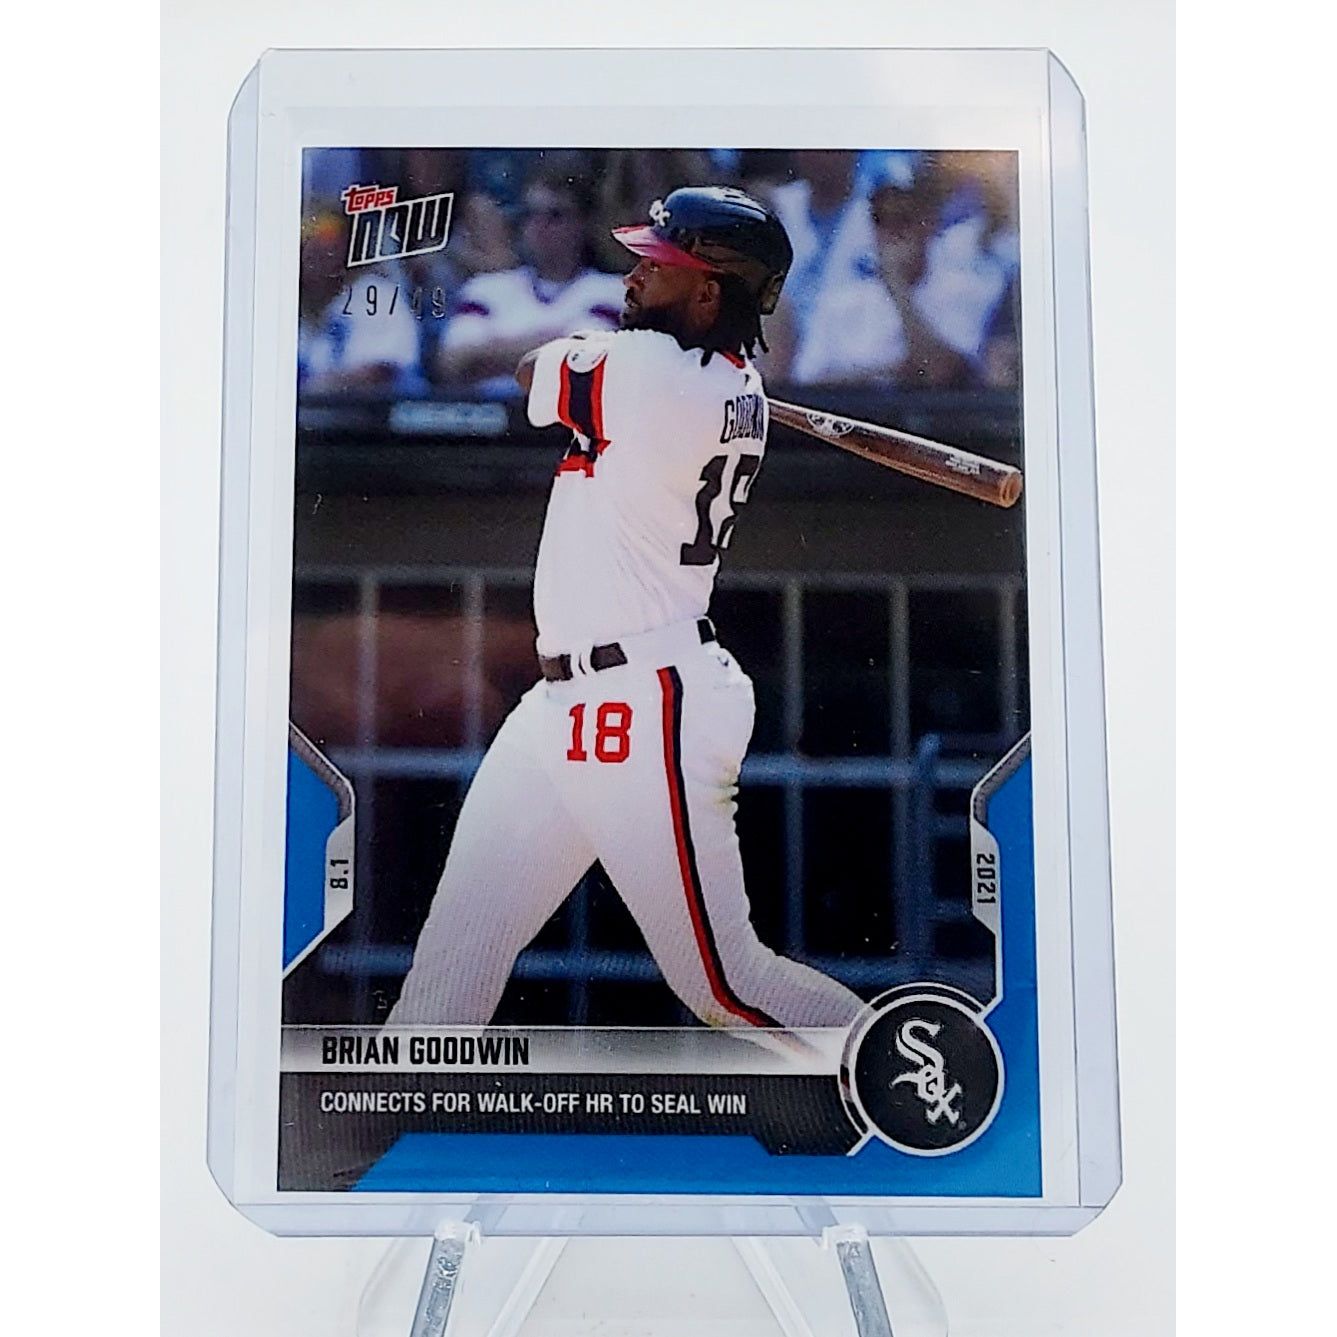 Brian Goodwin Walk-Off HR - 2021 MLB TOPPS NOW Card 600 - Blue Parallel - #29/49